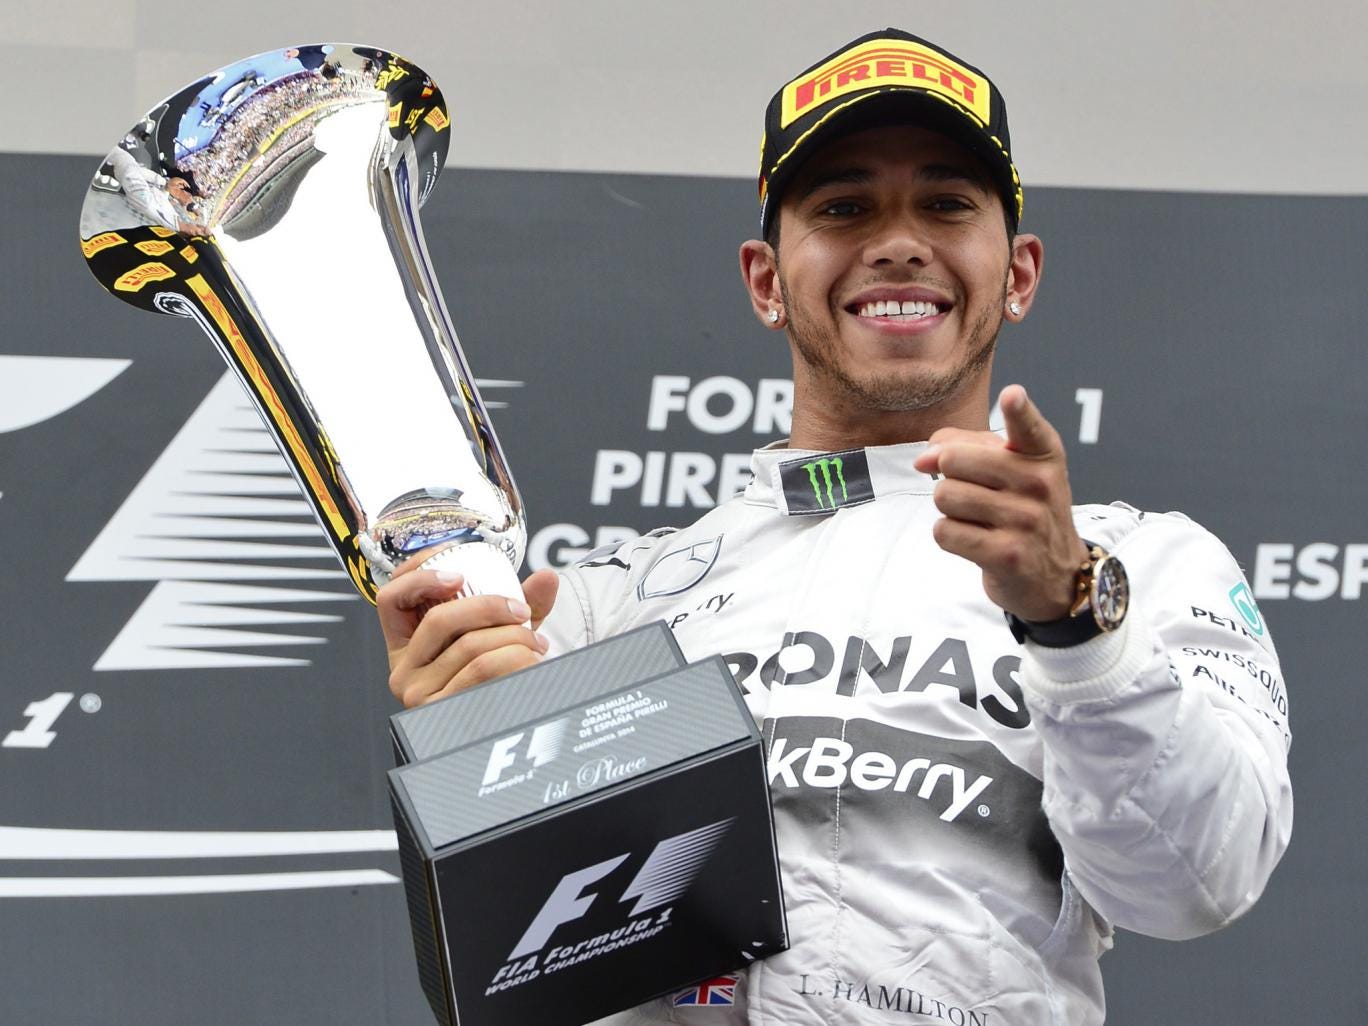 Lewis Hamilton celebrates with his trophy after winning the Spanish Grand Prix